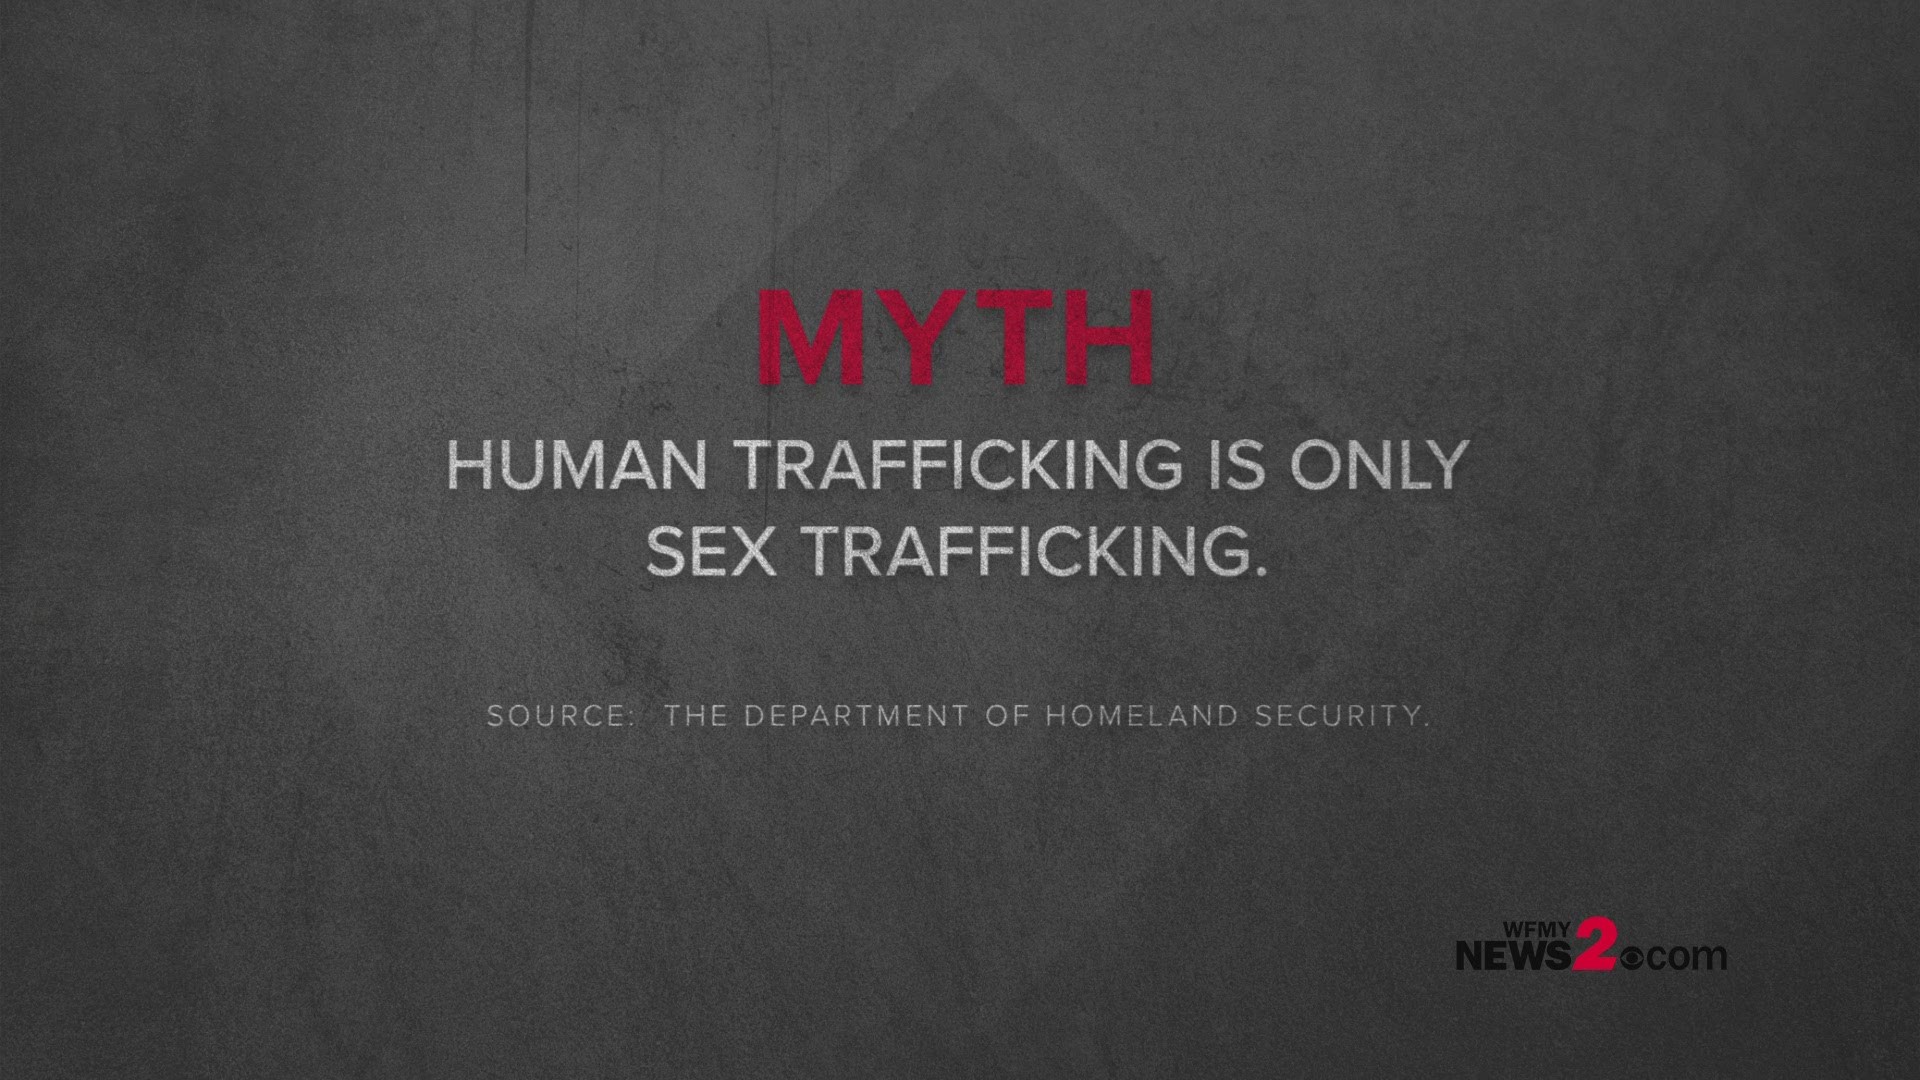 Human trafficking victims are found in legitimate and illegitimate labor industries worldwide like restaurants, sweatshops, hotels and farms.